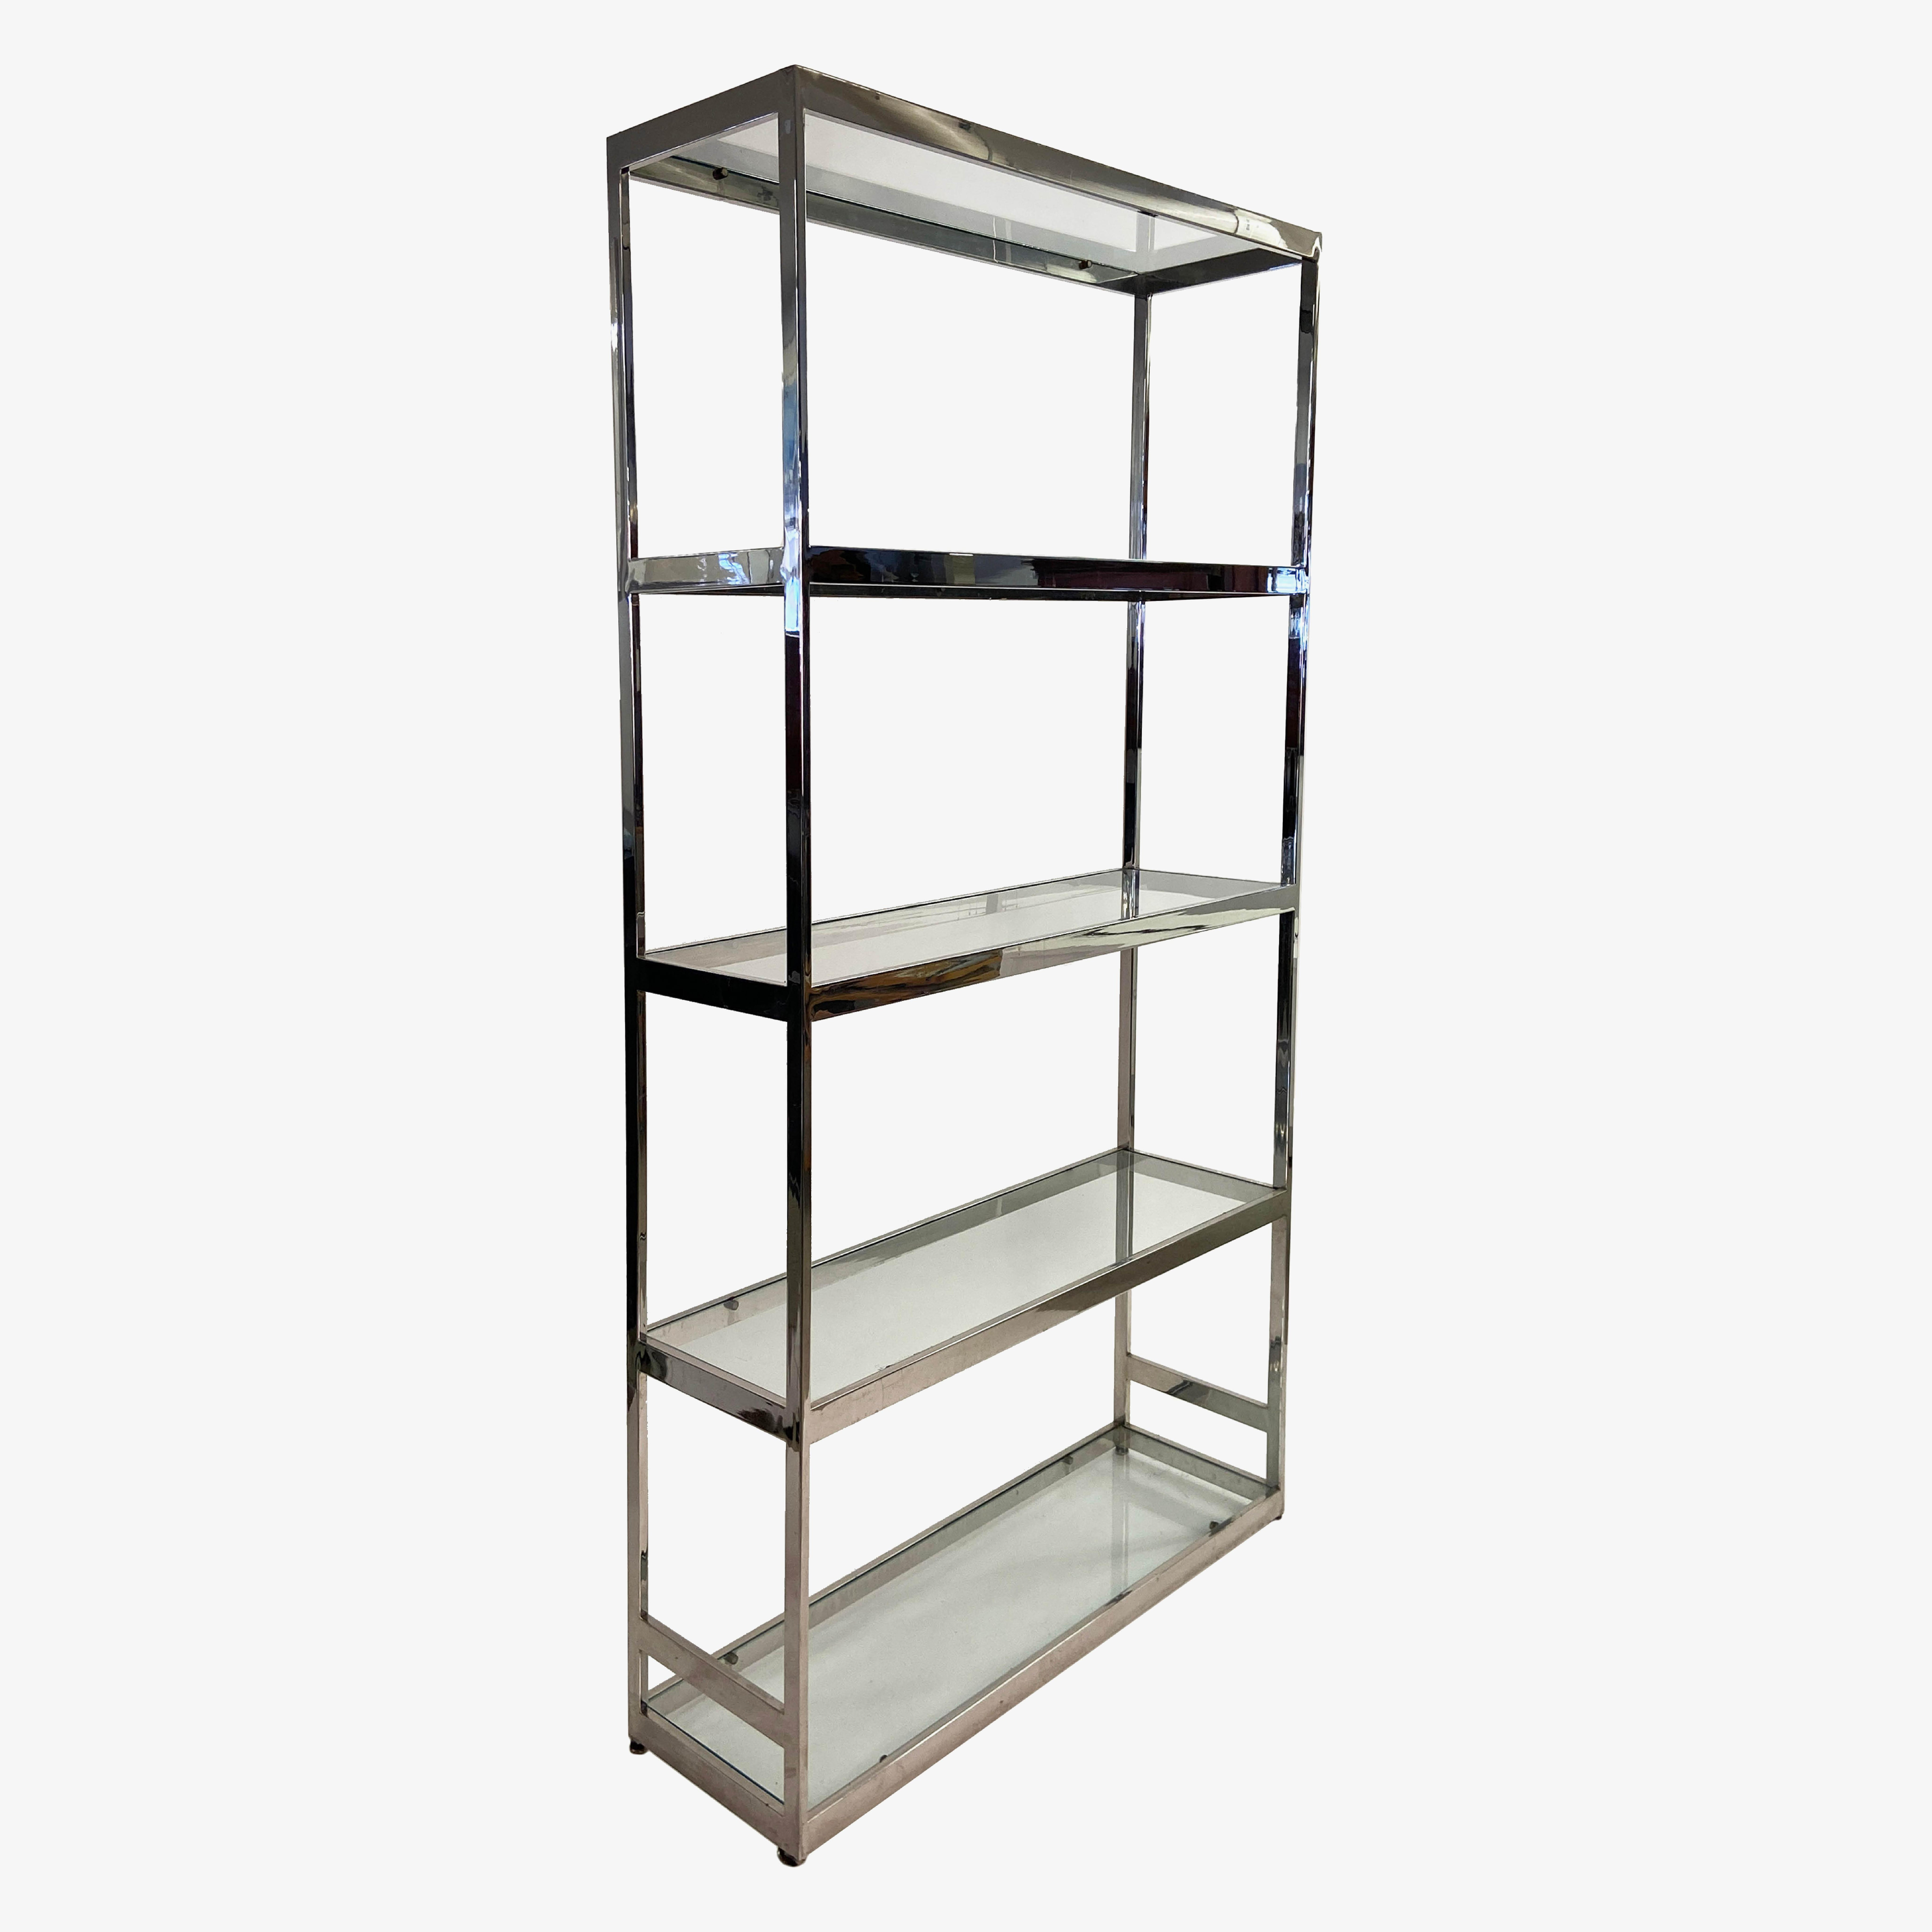 1970’s chrome étagère or bookshelf, designed in the manner of Milo Baughman. This attractive etagere has five glass shelves, including top and bottom. There are minor signs of wear but in overall good condition, consistent with age and use. 